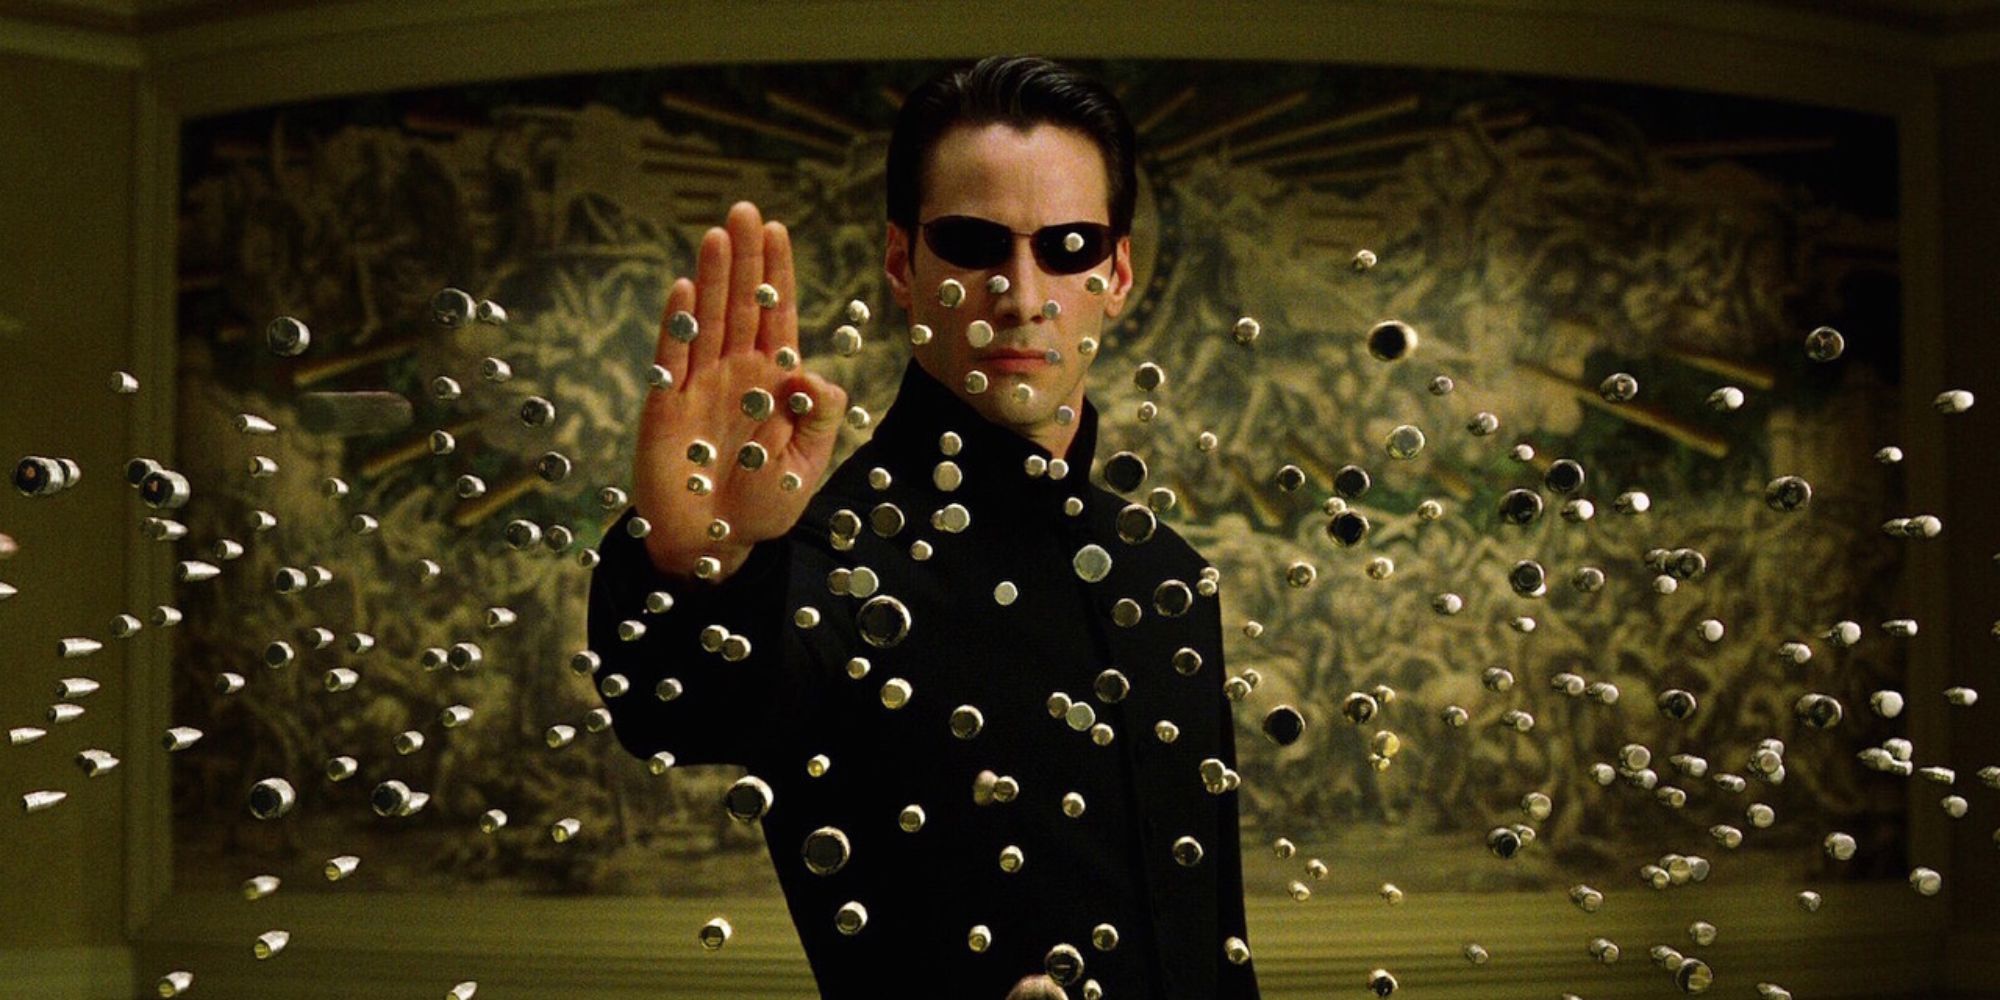 Keanu Reeves as Neo stops bullets in The Matrix Reloaded (2003)